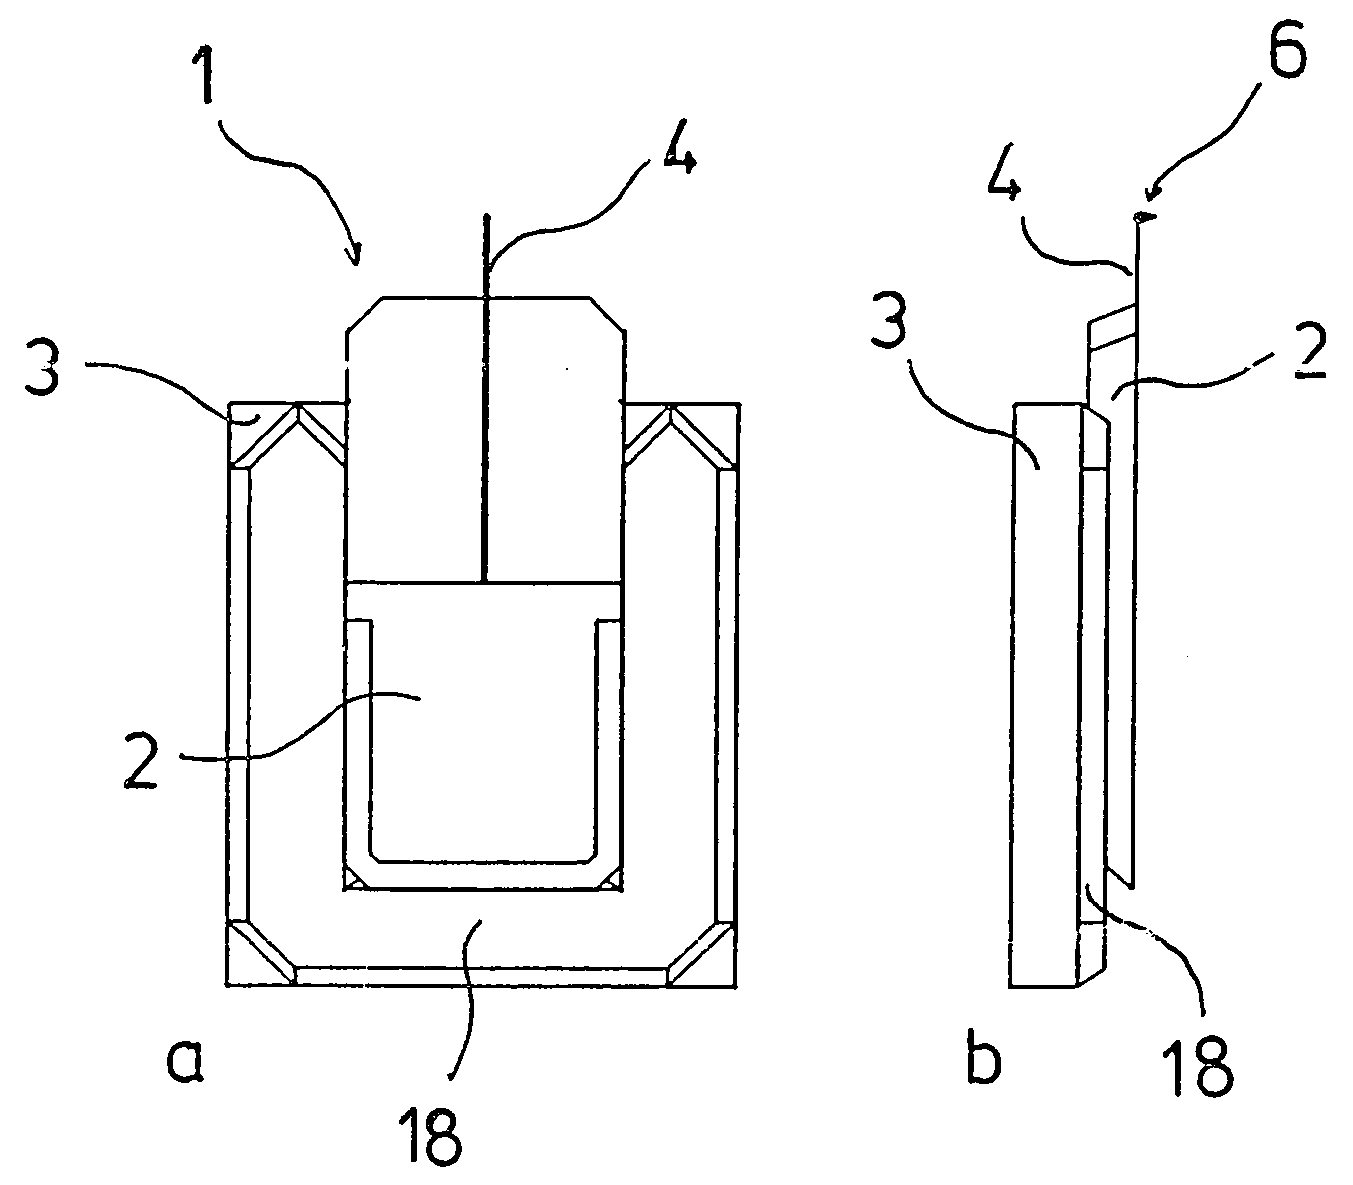 Self-aligning scanning probes for a scanning probe microscope